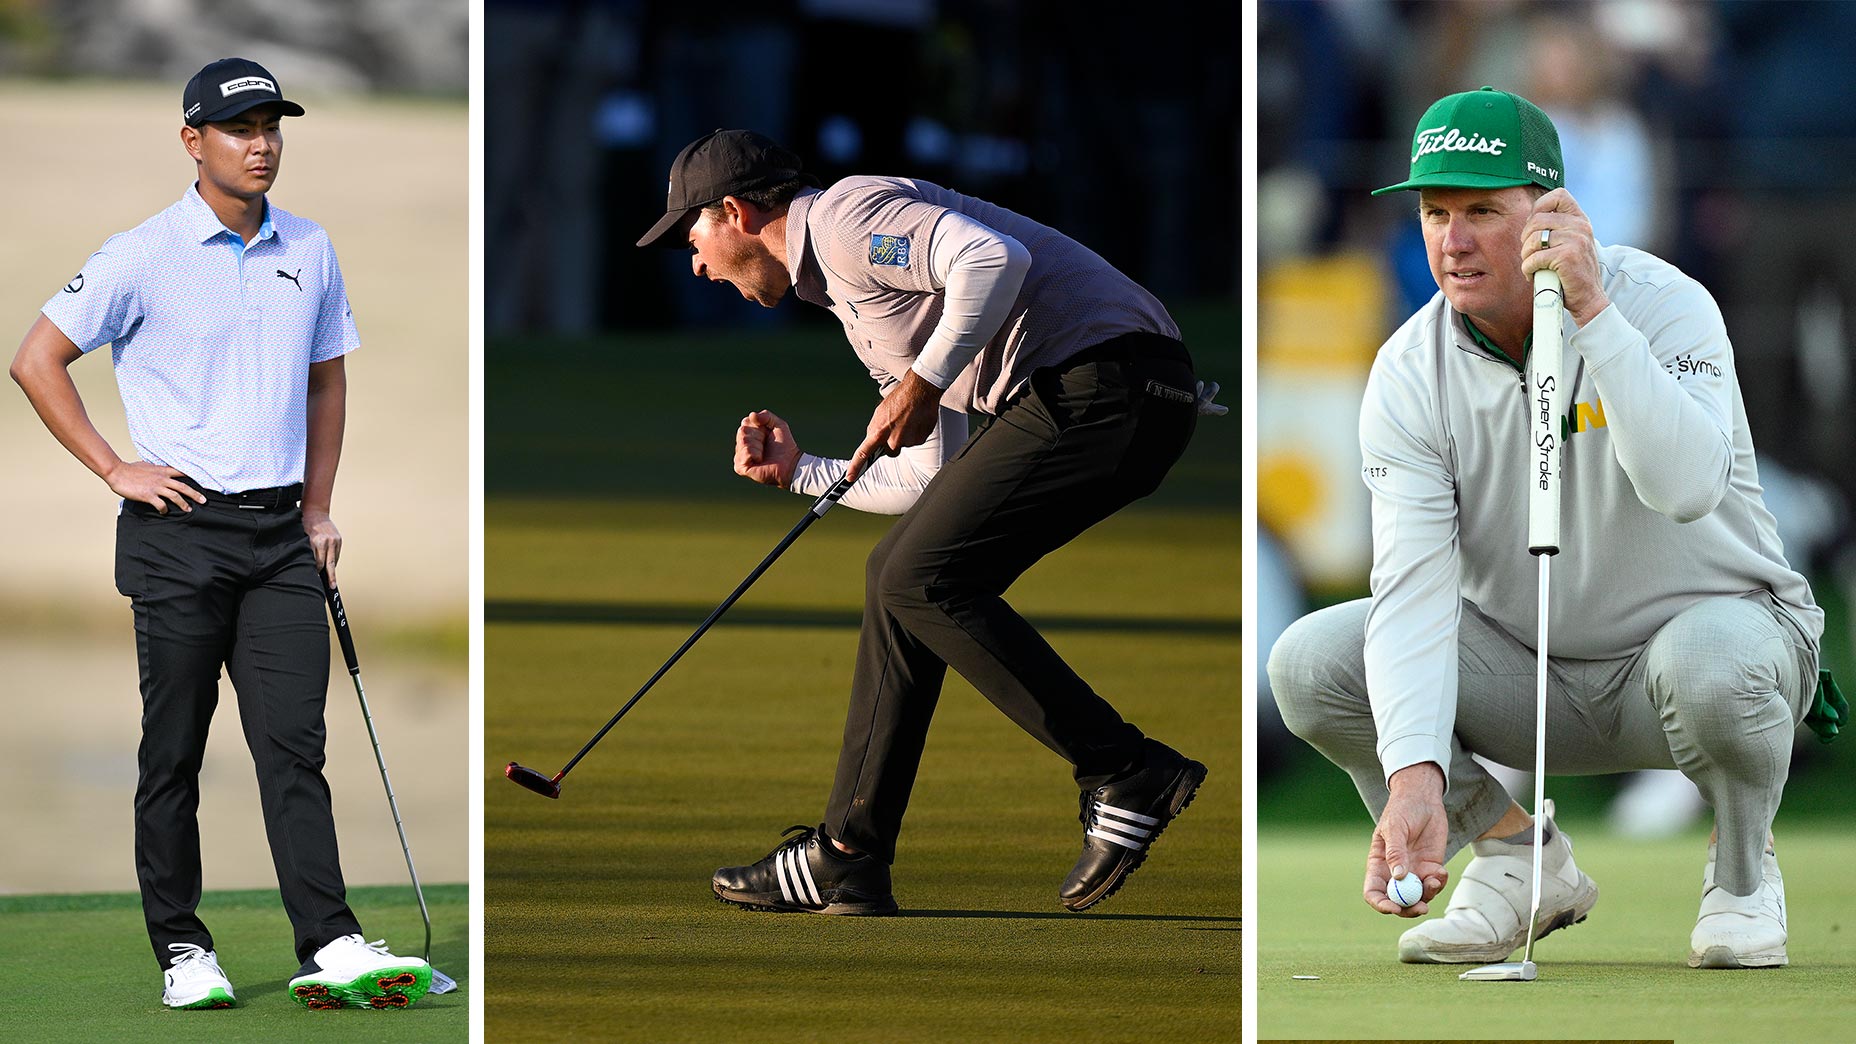 Justin Suh, Nick Taylor and Charley Hoffman at the Waste Management Phoenix Open in Scottsdale, AZ 2024. We're seeing a lot of popular shoe styles among the pros going into the 2024 season, but these shoes, in particular, caught our eye at the WM Phoenix Open.